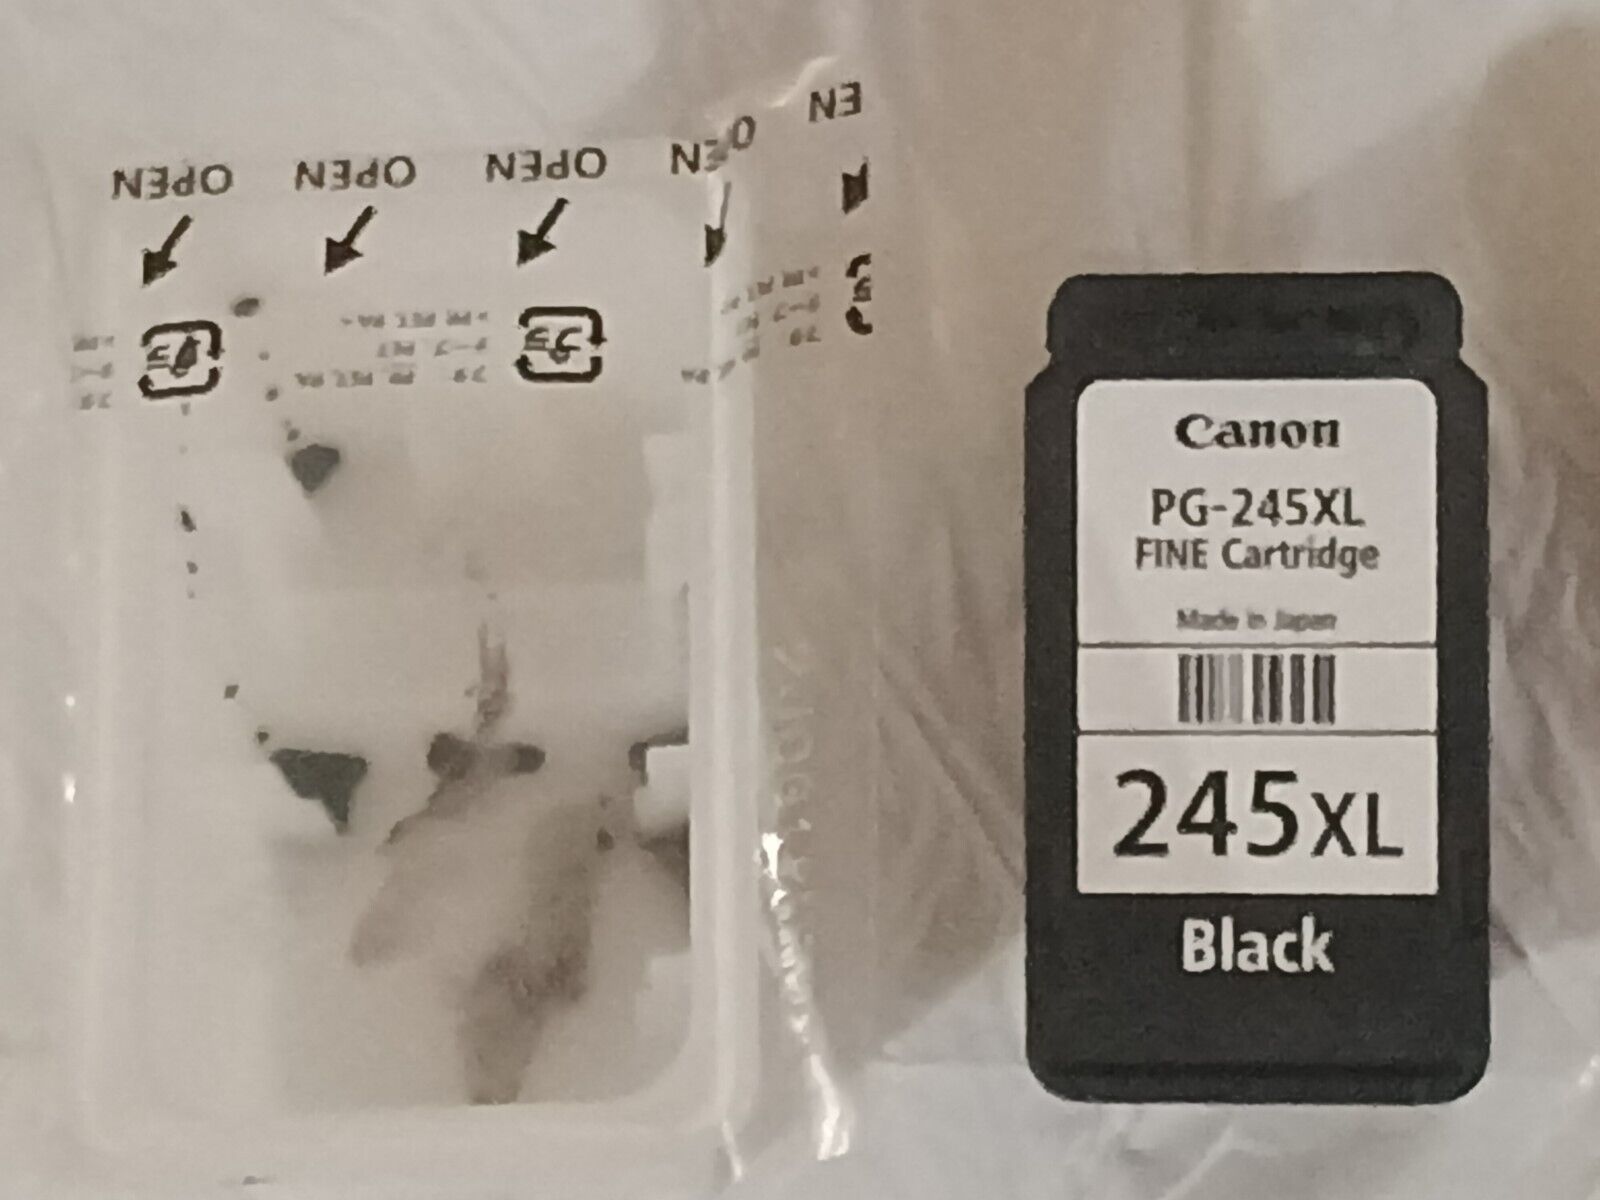 🔴 *EMPTY* Ink Cartridge Canon PG-245XL For Refill Only.